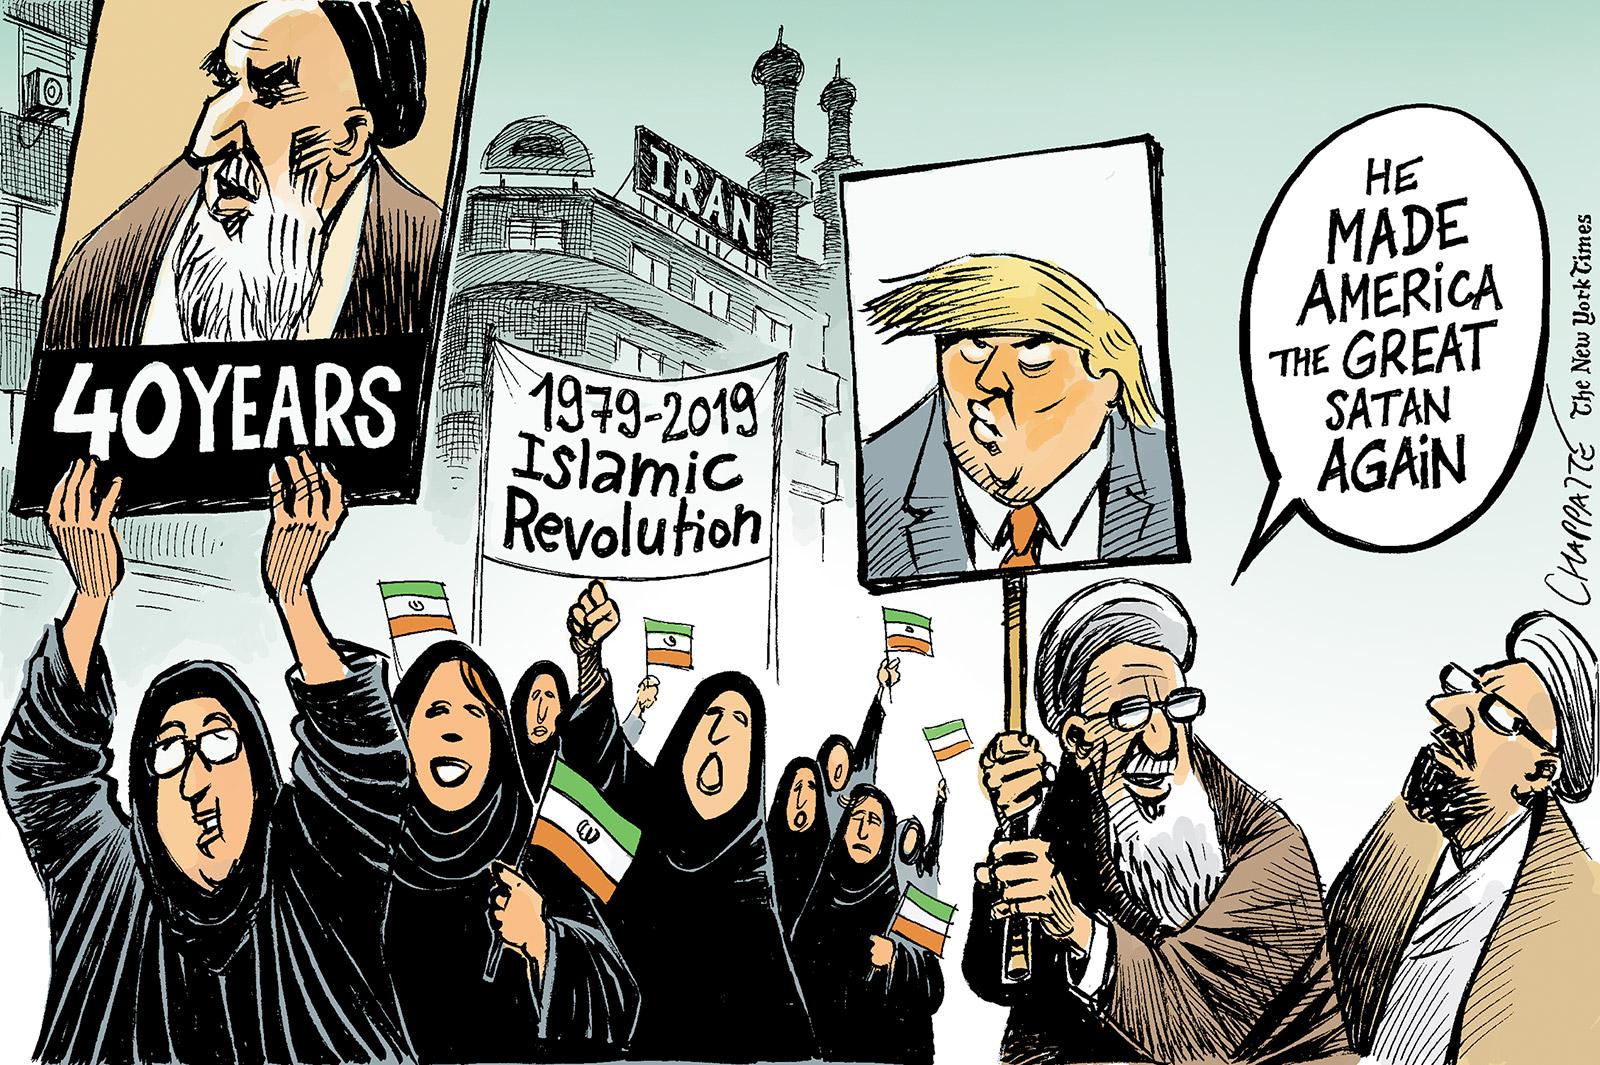 Iran: 40 years after the Revolution